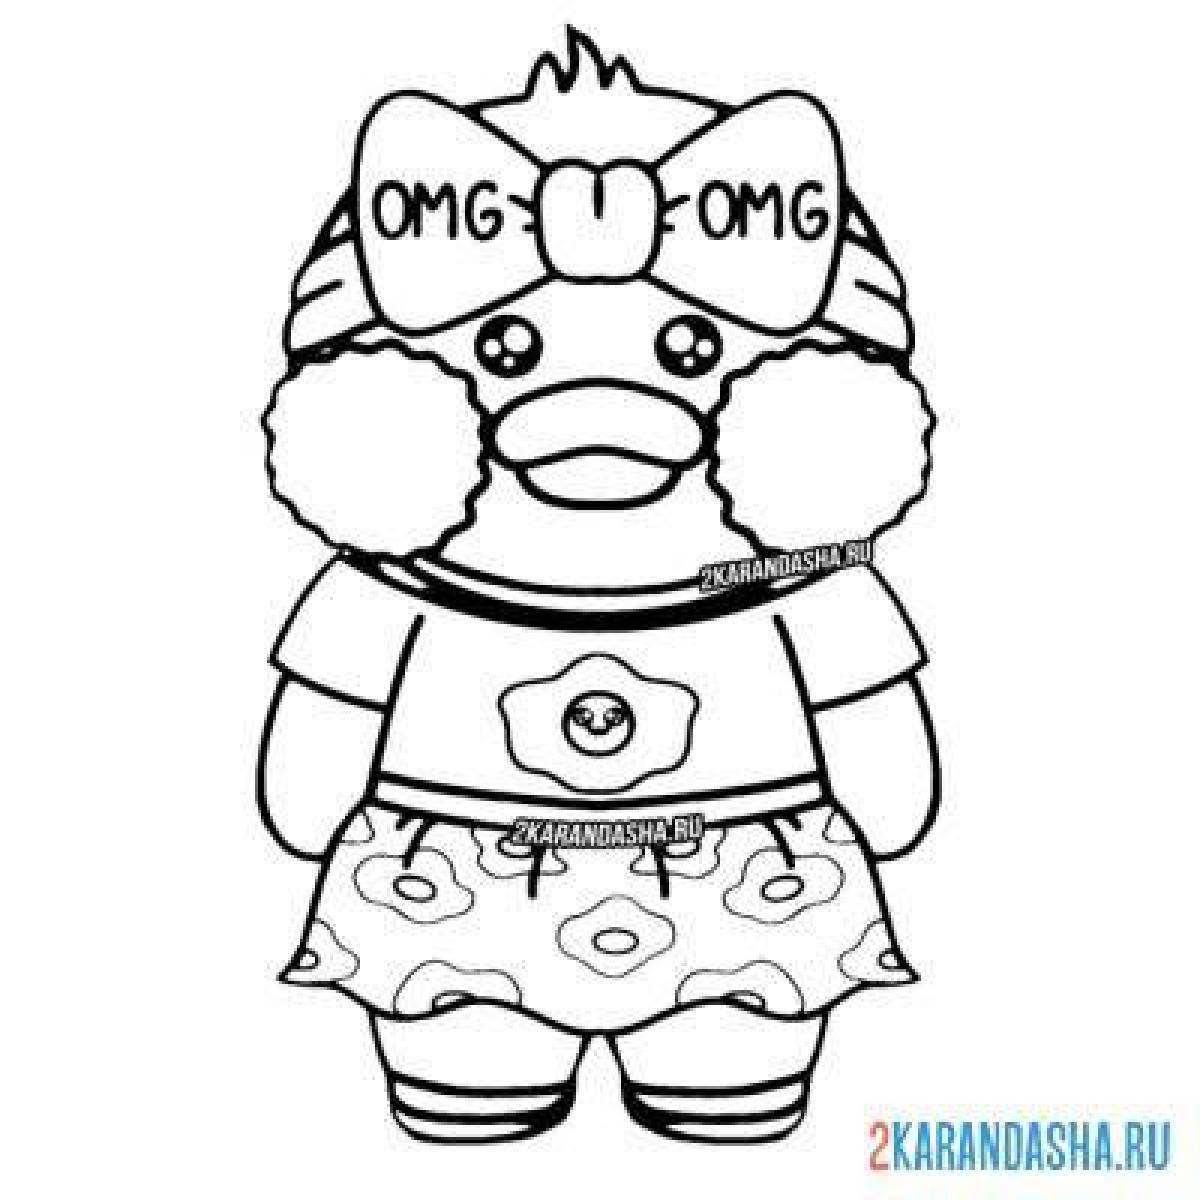 Lalafanfan crazy duck coloring page